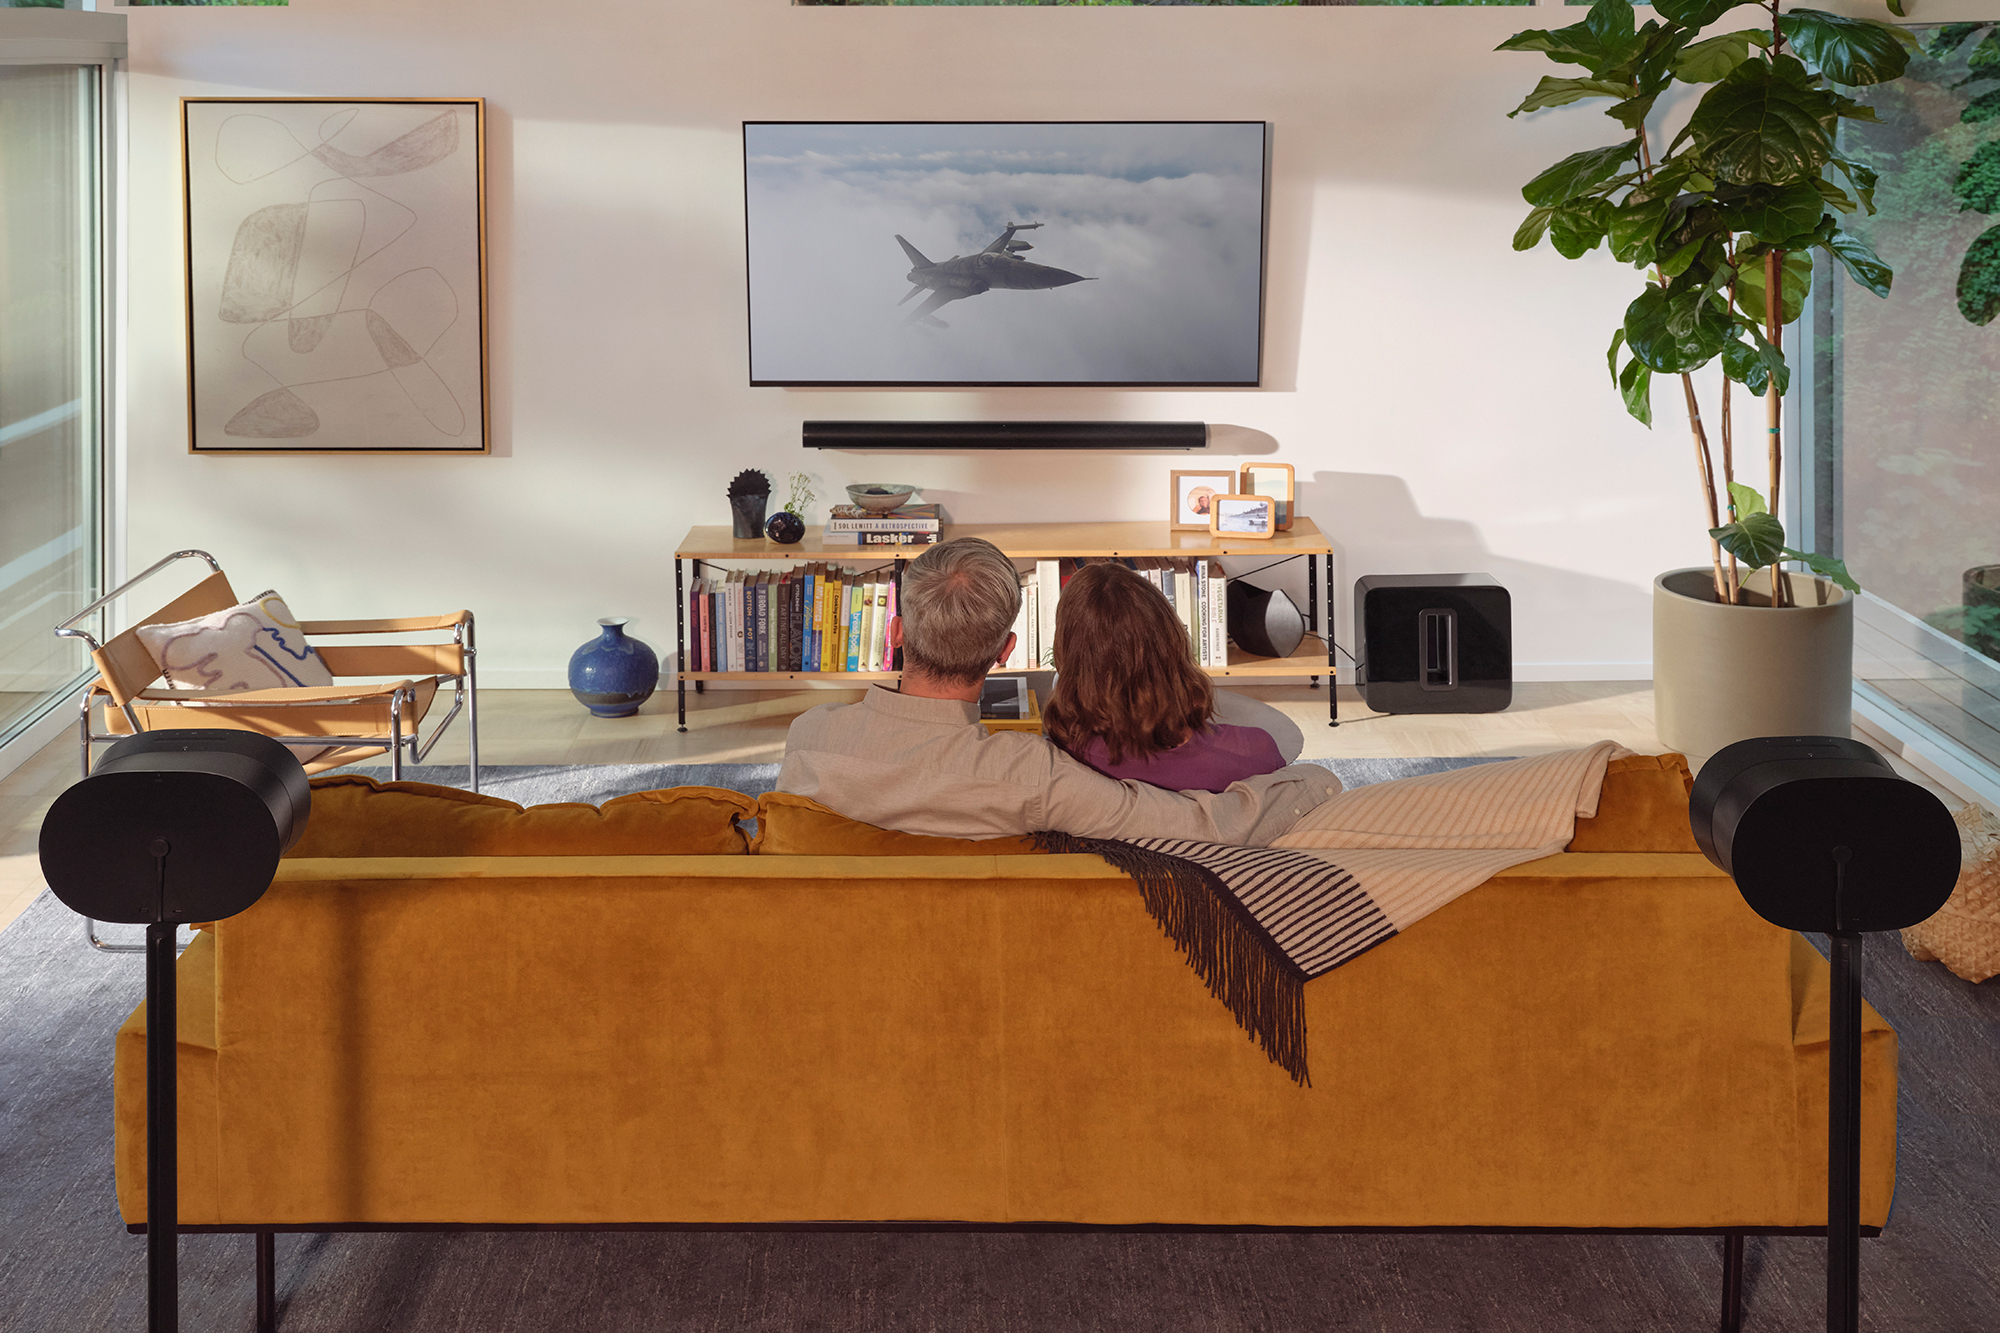 The best home-theater from soundbars to multi-speaker arrays | Popular Science